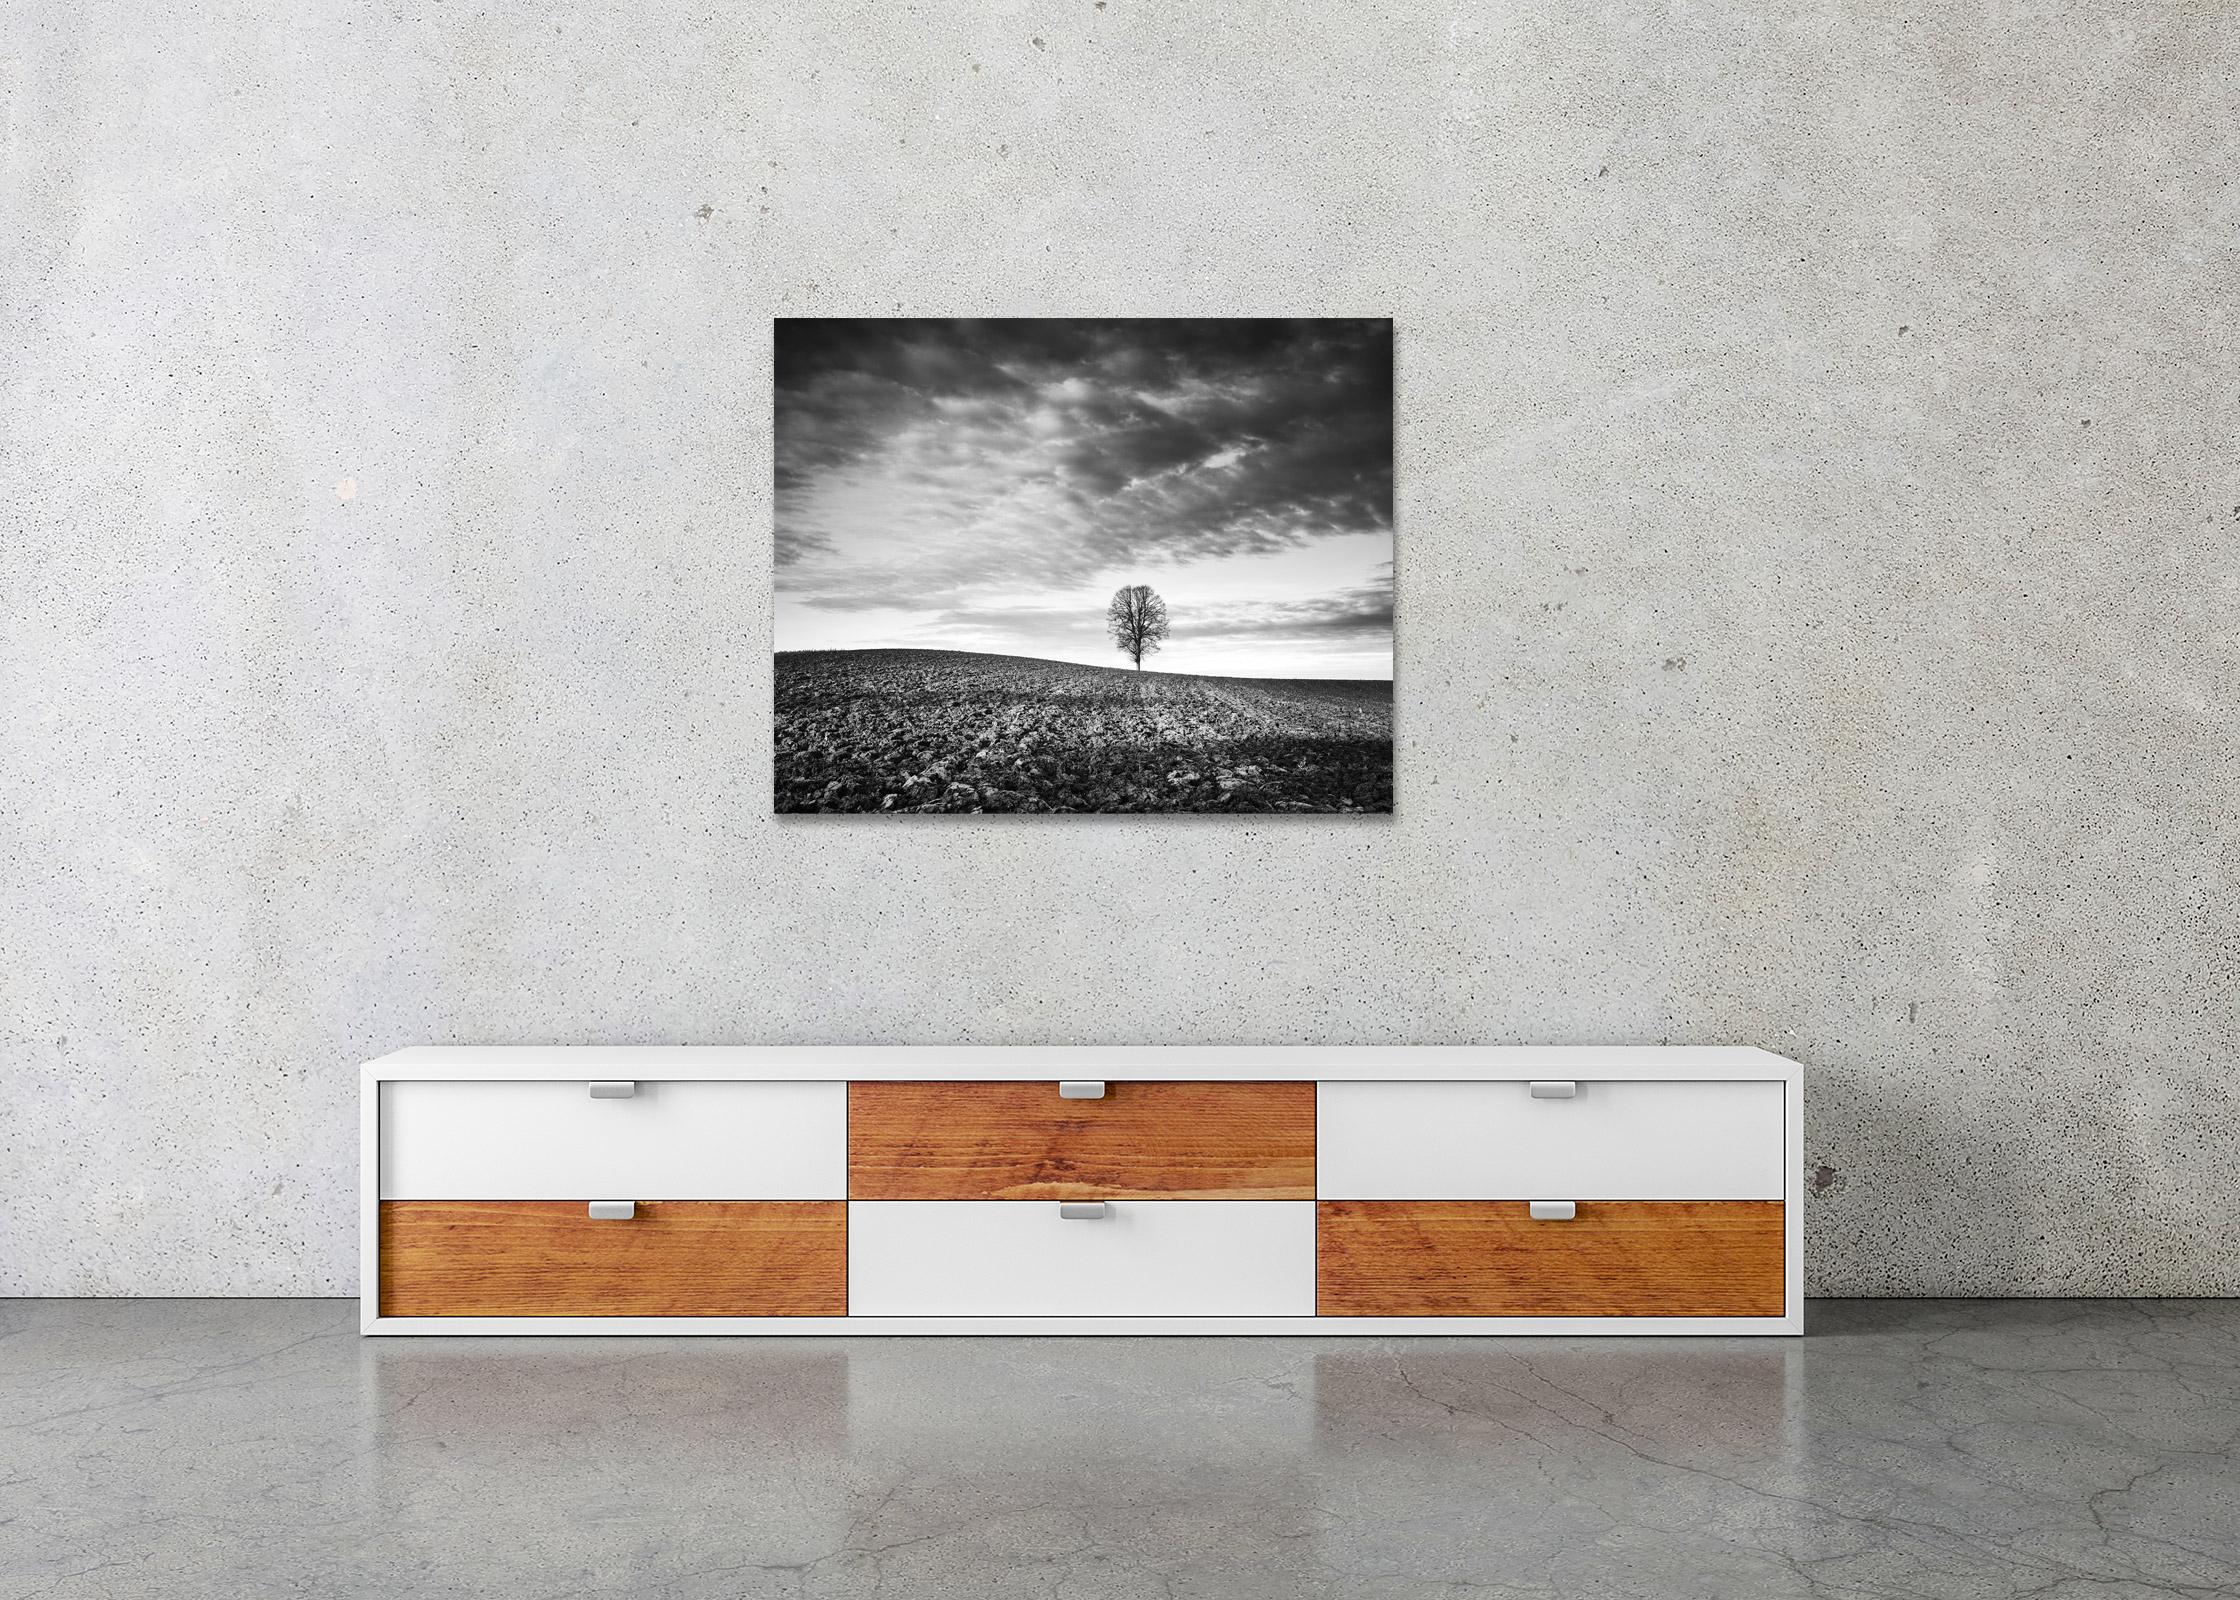 Black and White Fine Art Photography - Lonely Tree, Field, Storm, Field, Clouds, Austria. Archival pigment ink print, edition of 7. Signed, titled, dated and numbered by artist. Certificate of authenticity included. Printed with 4cm white